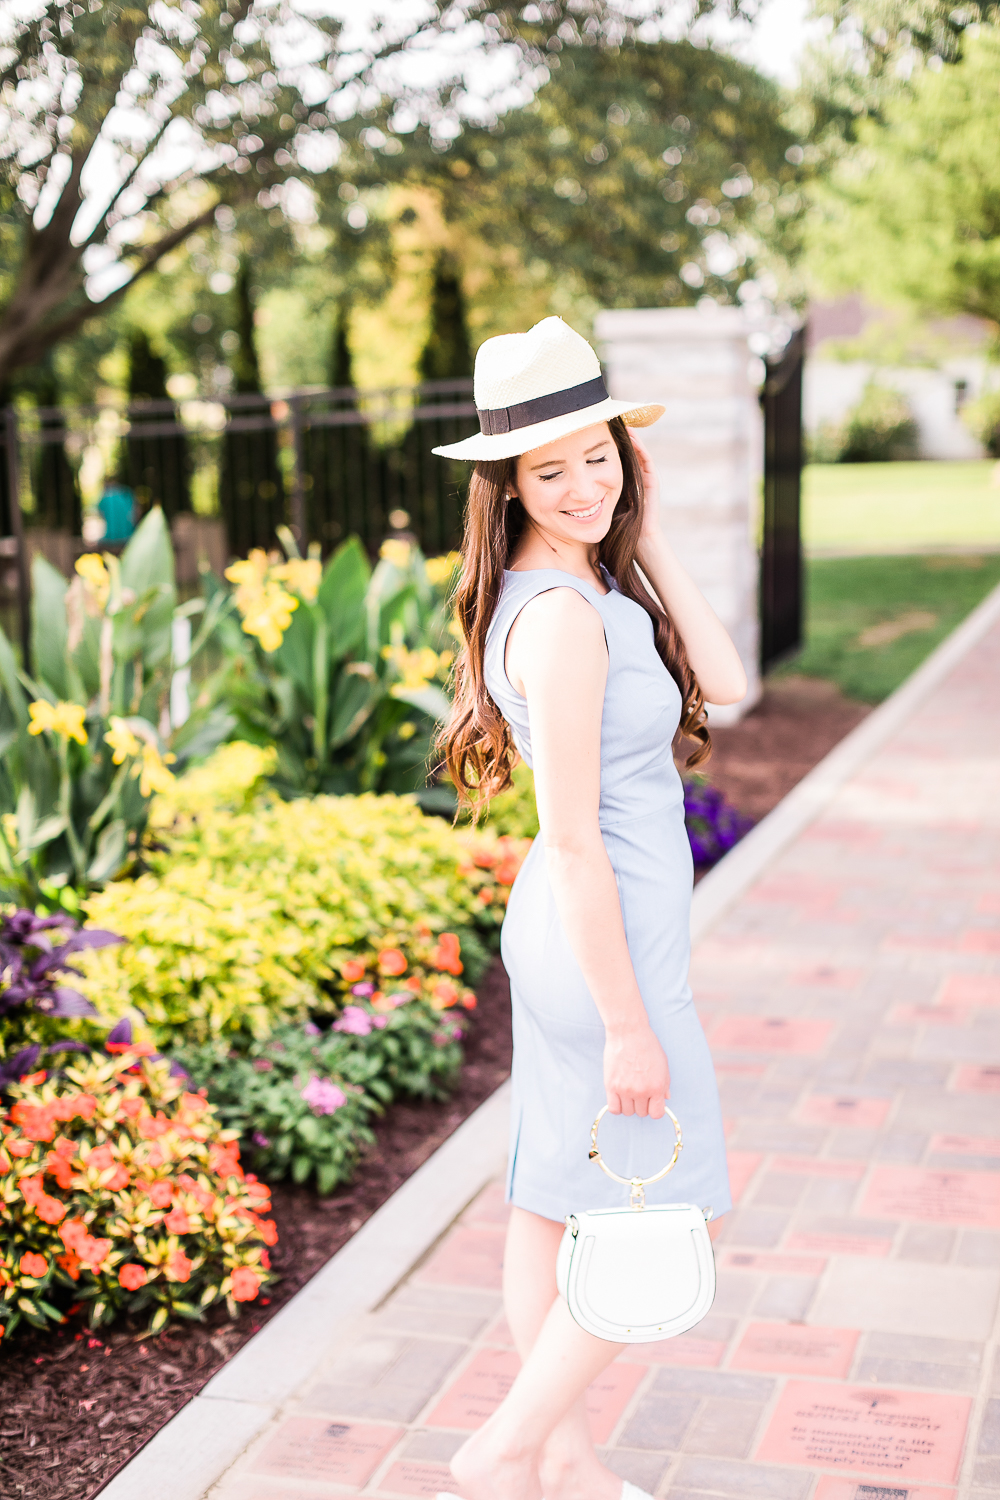 How to wear a sheath dress on vacation, Banana Republic paneled sheath dress, Banana Republic Packable Raffia Hat, Go with the Flow: How to Wear Your Work Clothes on Vacation by affordable style blogger Stephanie Ziajka from Diary of a Debutante